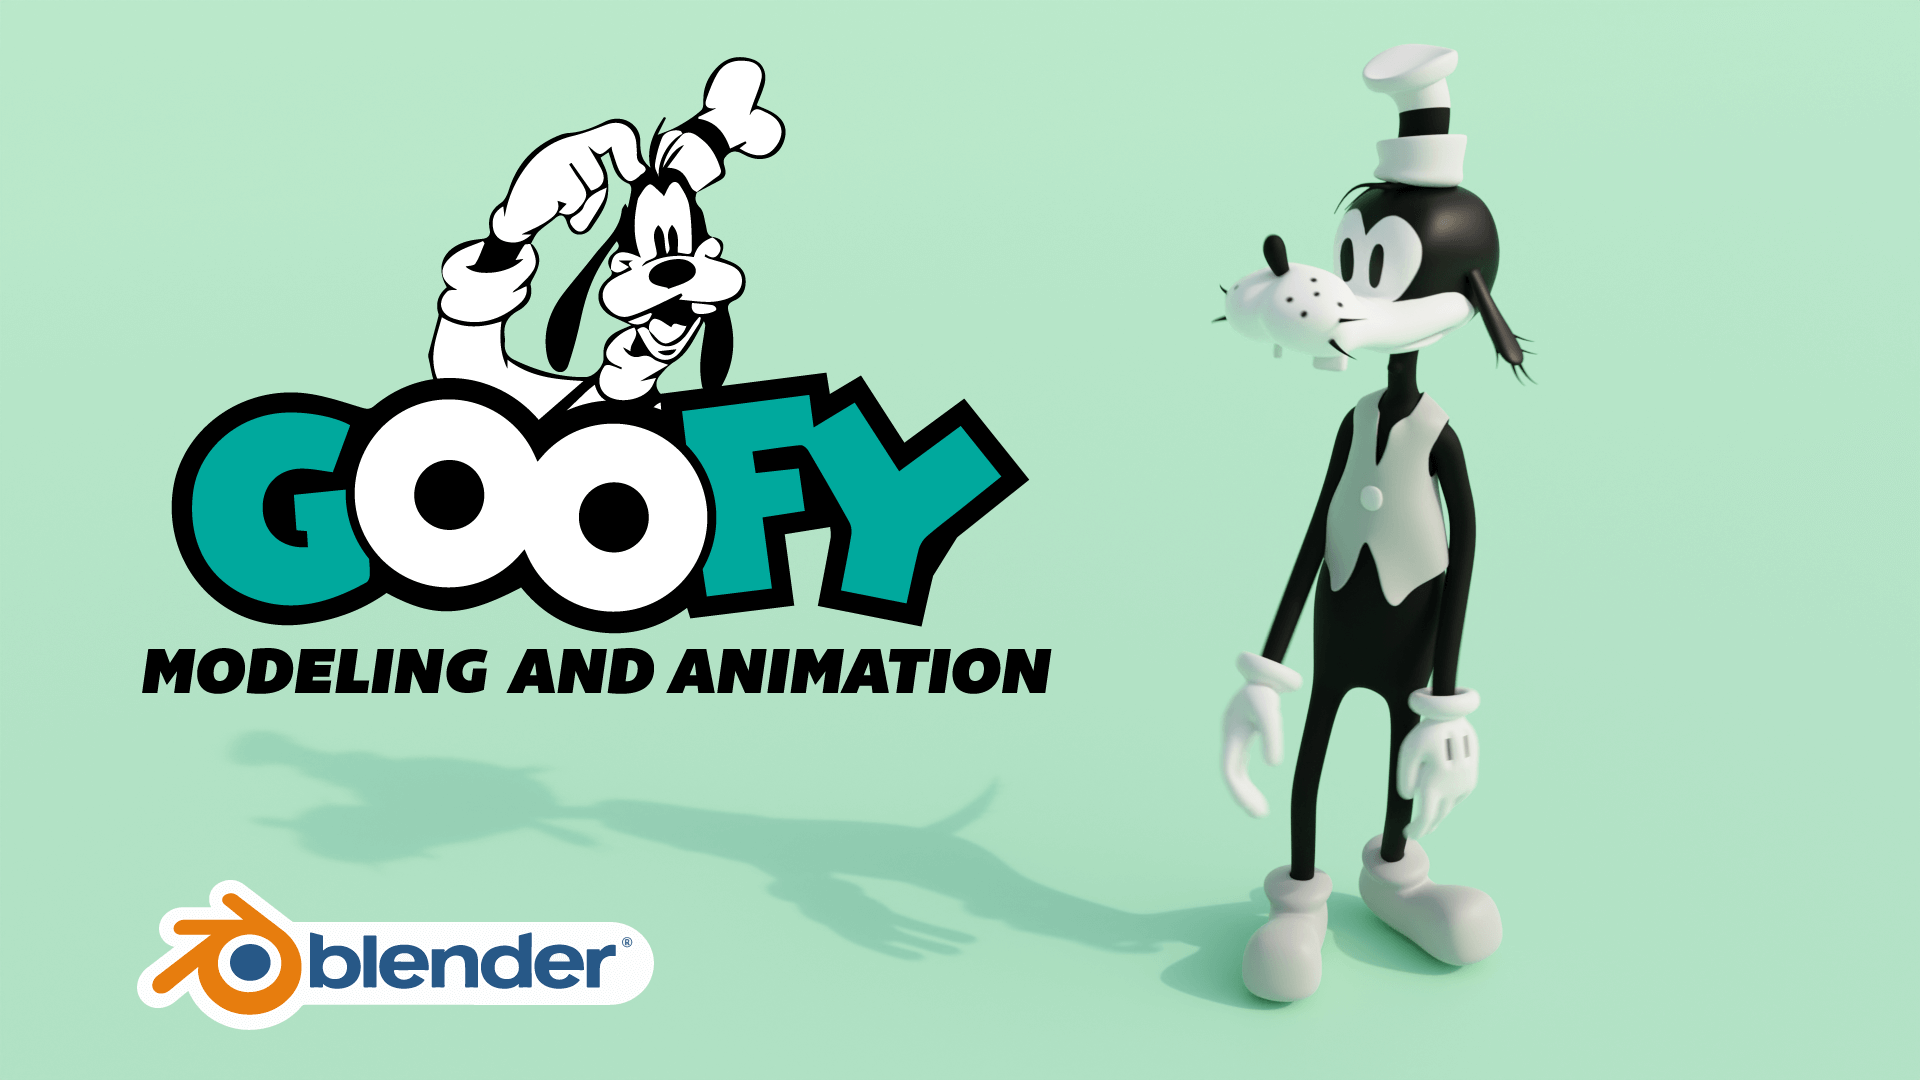 Creating And Animating A 3D Disney Character Goofy | Render Craft